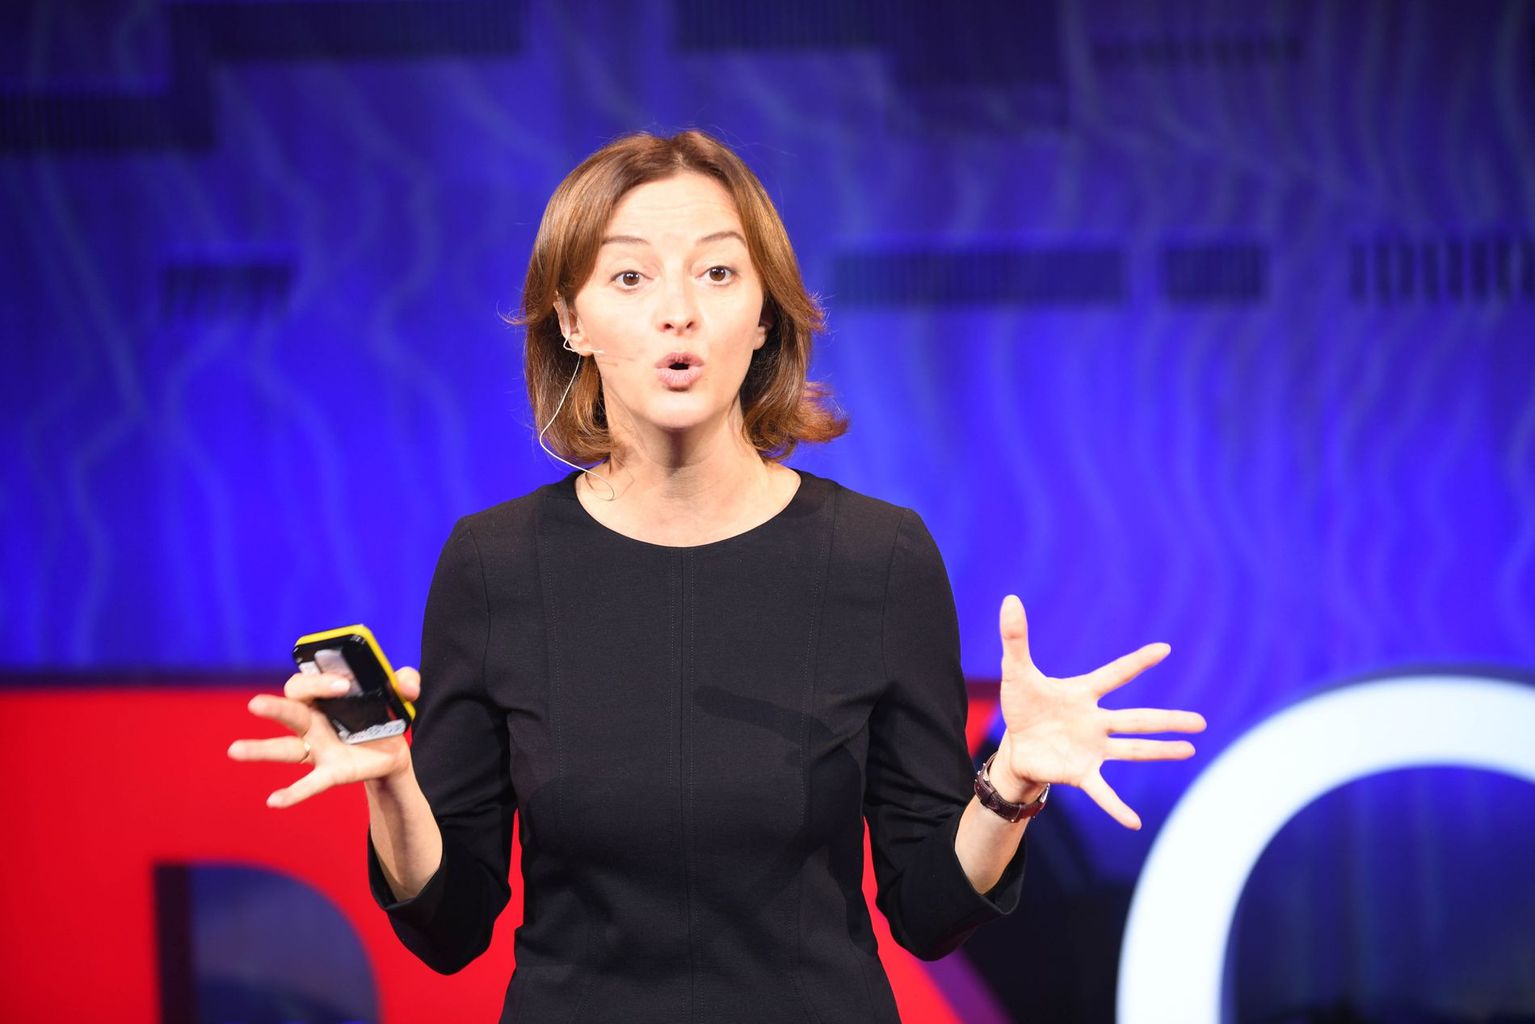 Prof. Laura Baudis is one of those physicists who not only conduct cutting-edge research, but also have the gift of effectively communicating the results to a broad public. Pictured: Performing at a TED Talk at CERN.